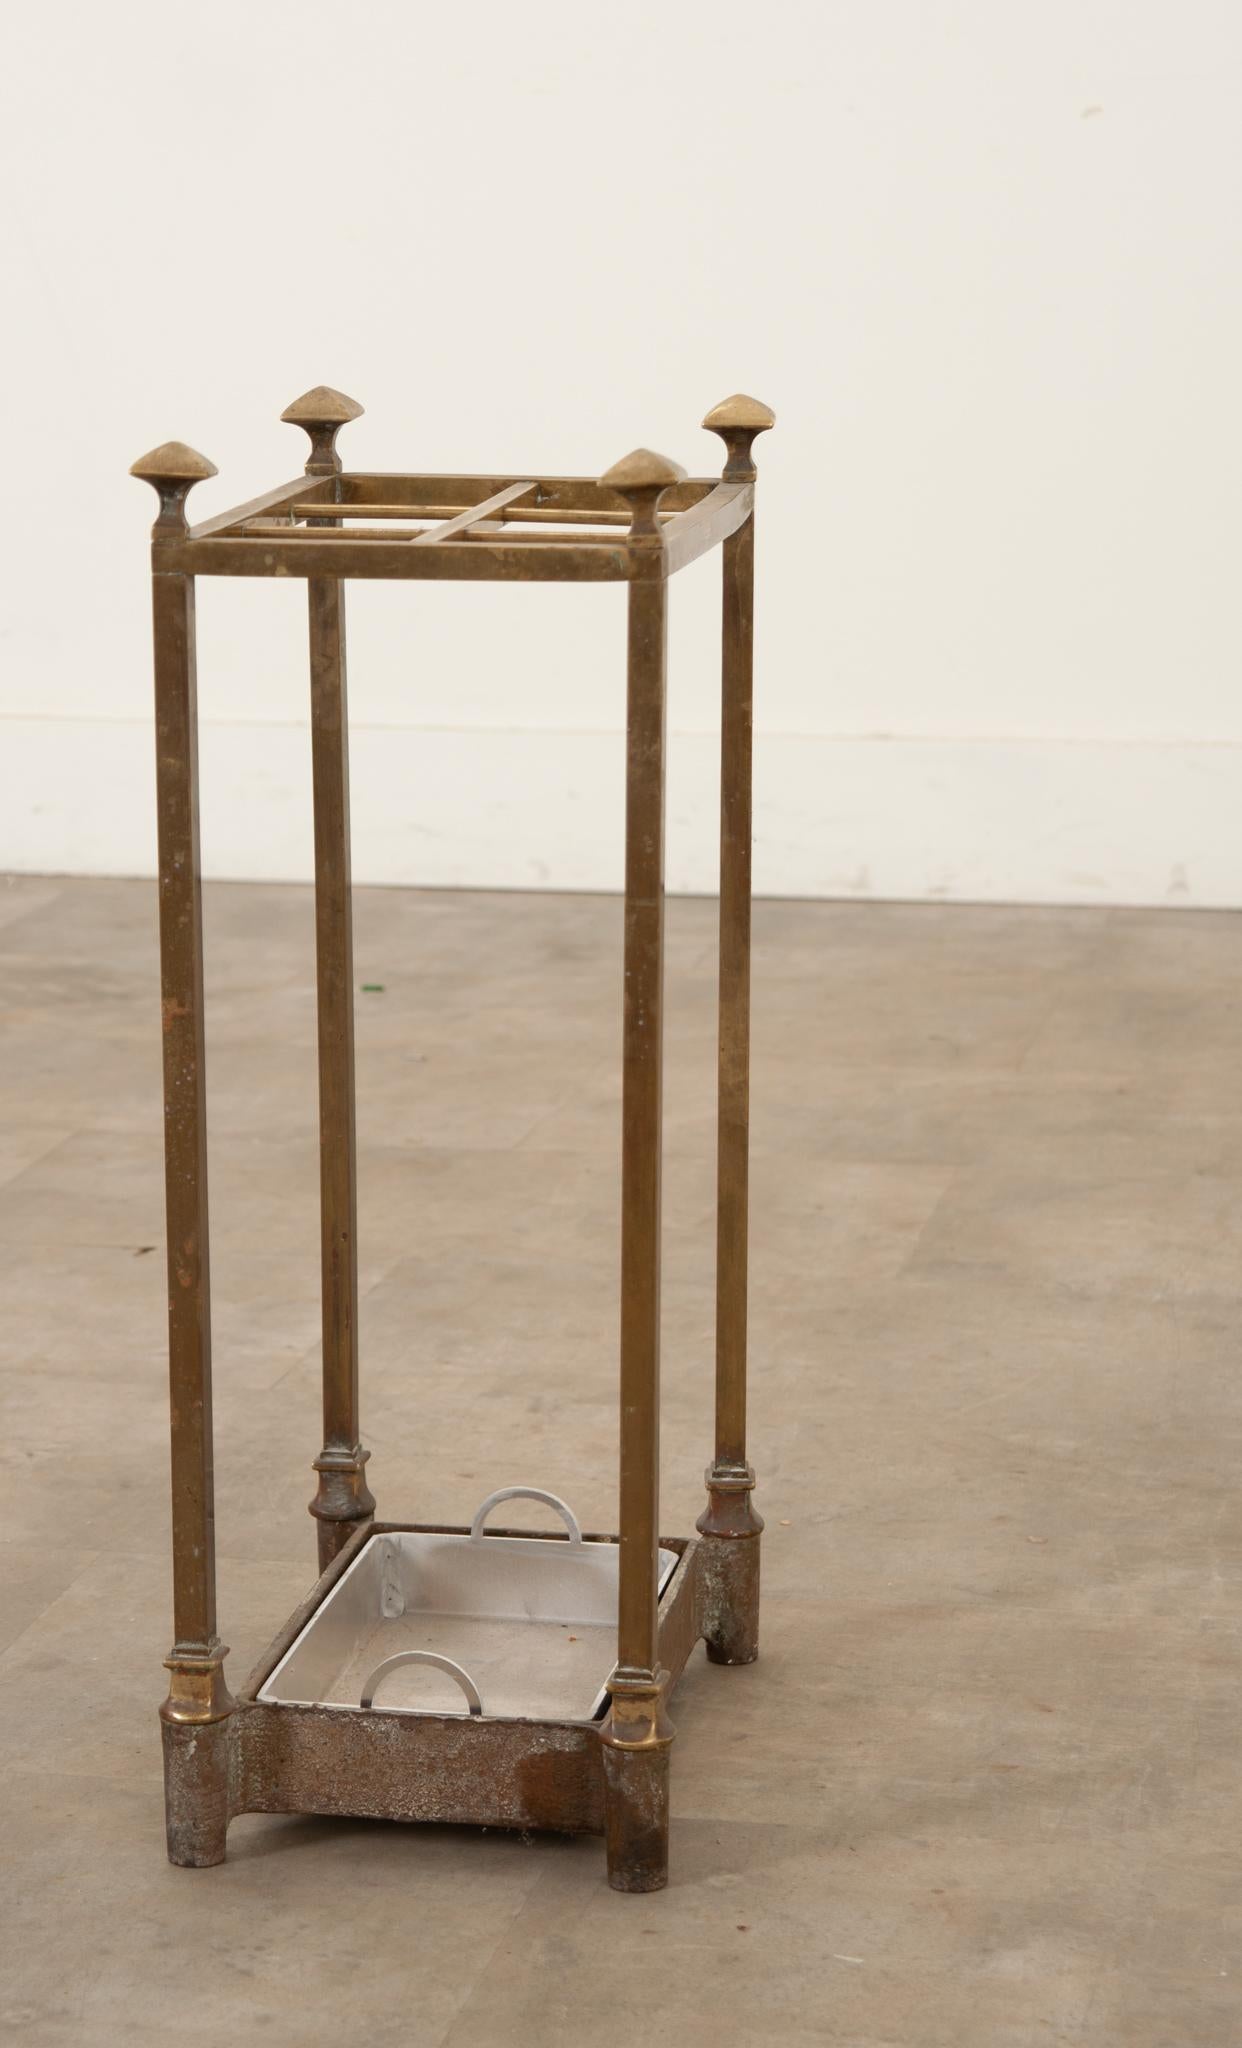 A vintage, brass segmented umbrella or walking stick stand made in France. This stand consists of 6 compartments for belongings and a new removable steel drip tray; its legs are topped with 4 decorative finials, and showcases a desirable aged